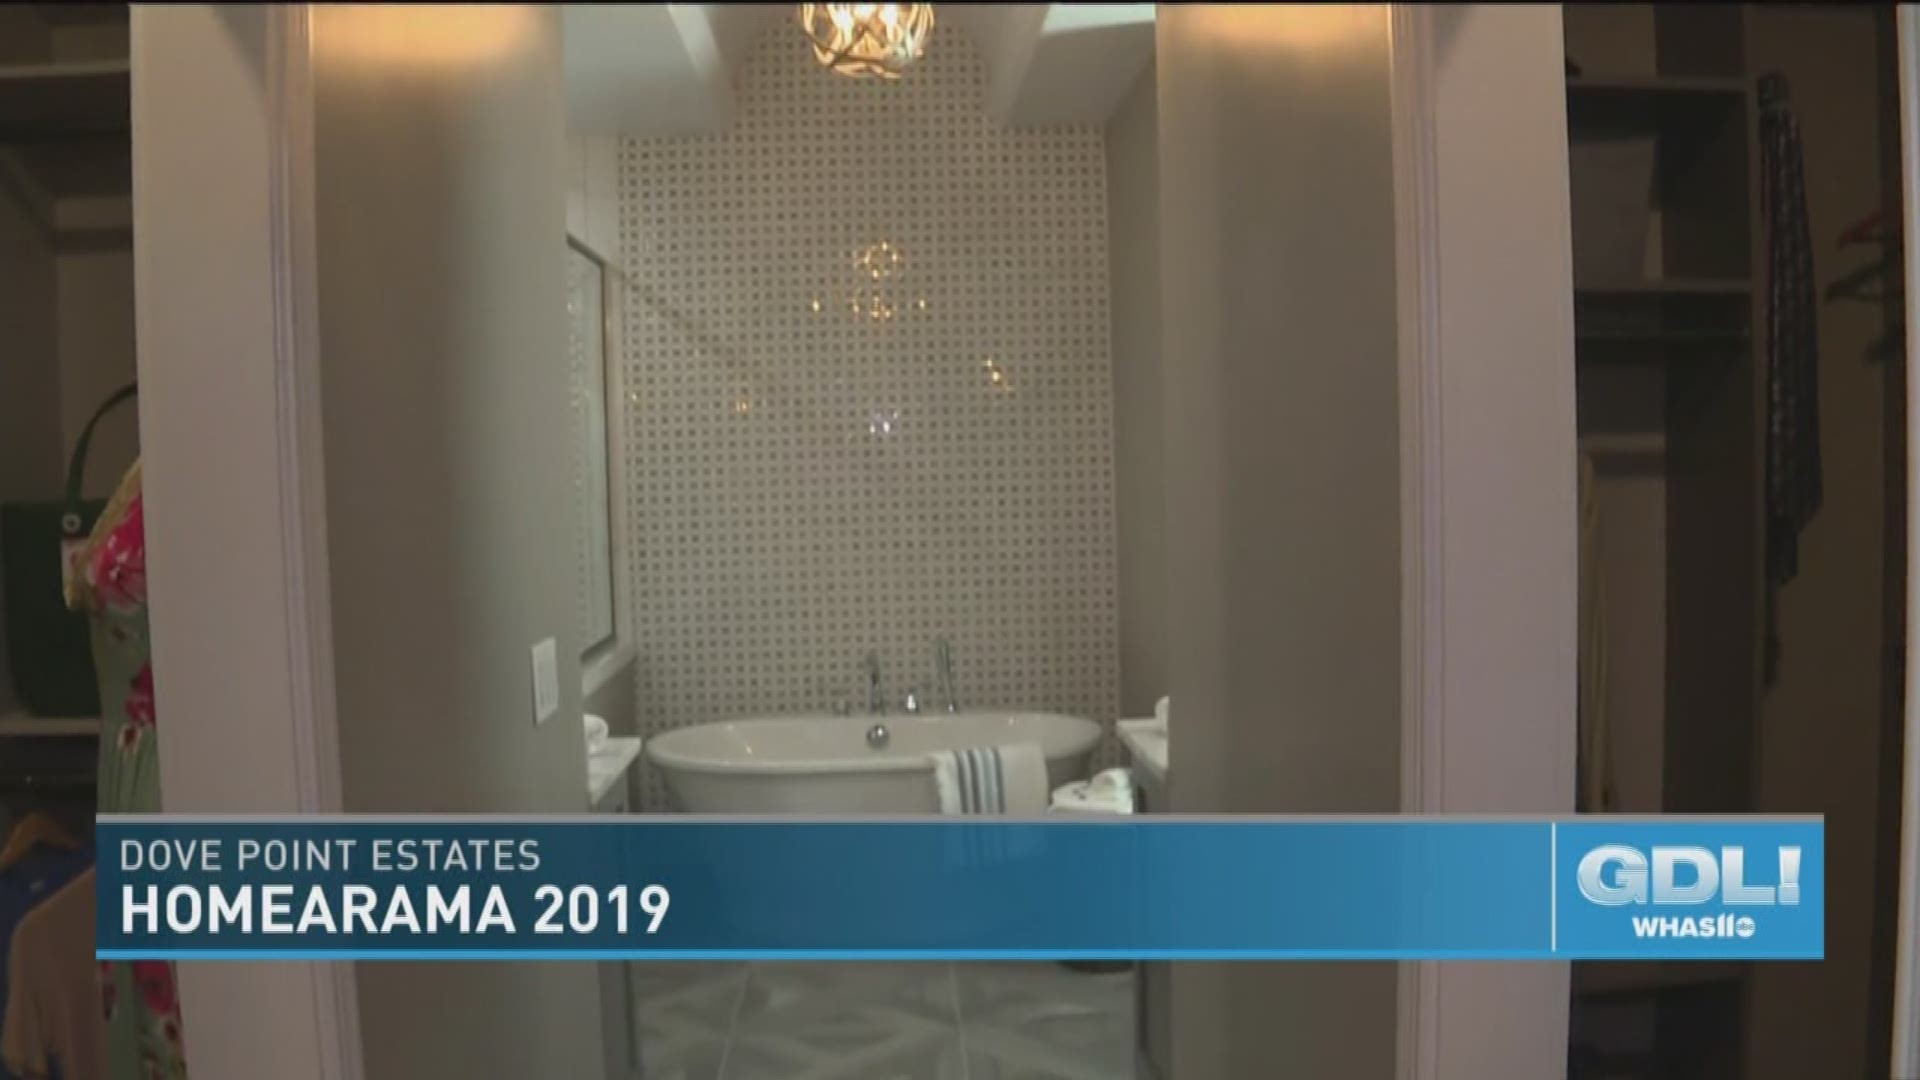 Homearama 2019 is July 13-28, 2019 at 4063 Sweeney Lane in Dove Point Estates in Louisville, KY. For more information, go to BIALouisville.com.